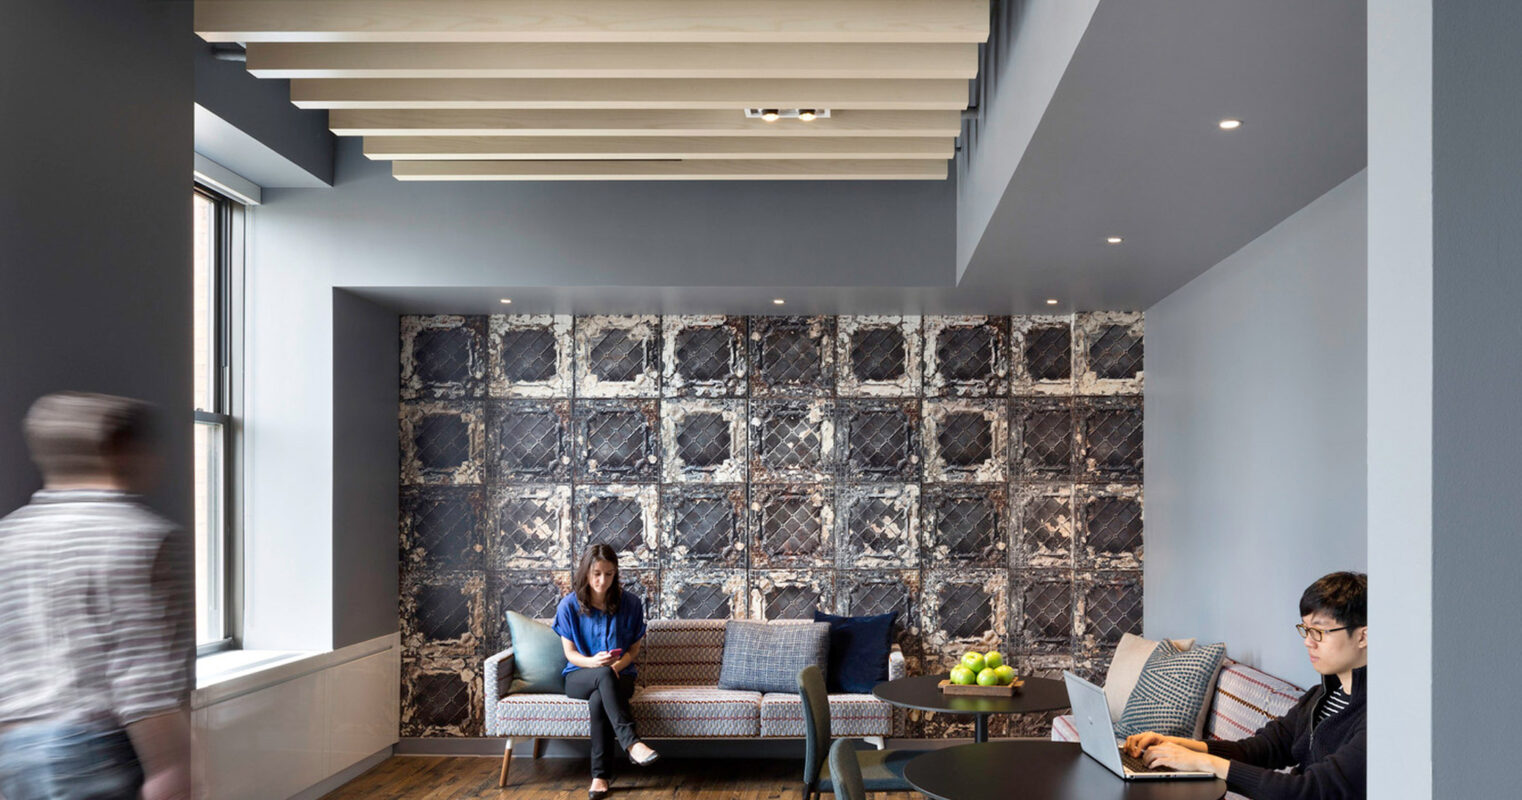 Open-plan office space featuring a geometric patterned accent wall, suspended linear lighting, and contrasting deep blue and neutral tones. Seating includes a textured gray sofa and armchairs, complementing the industrial-style exposed ceiling beams. Occupants engage in individual tasks, emphasizing the room's functionality.